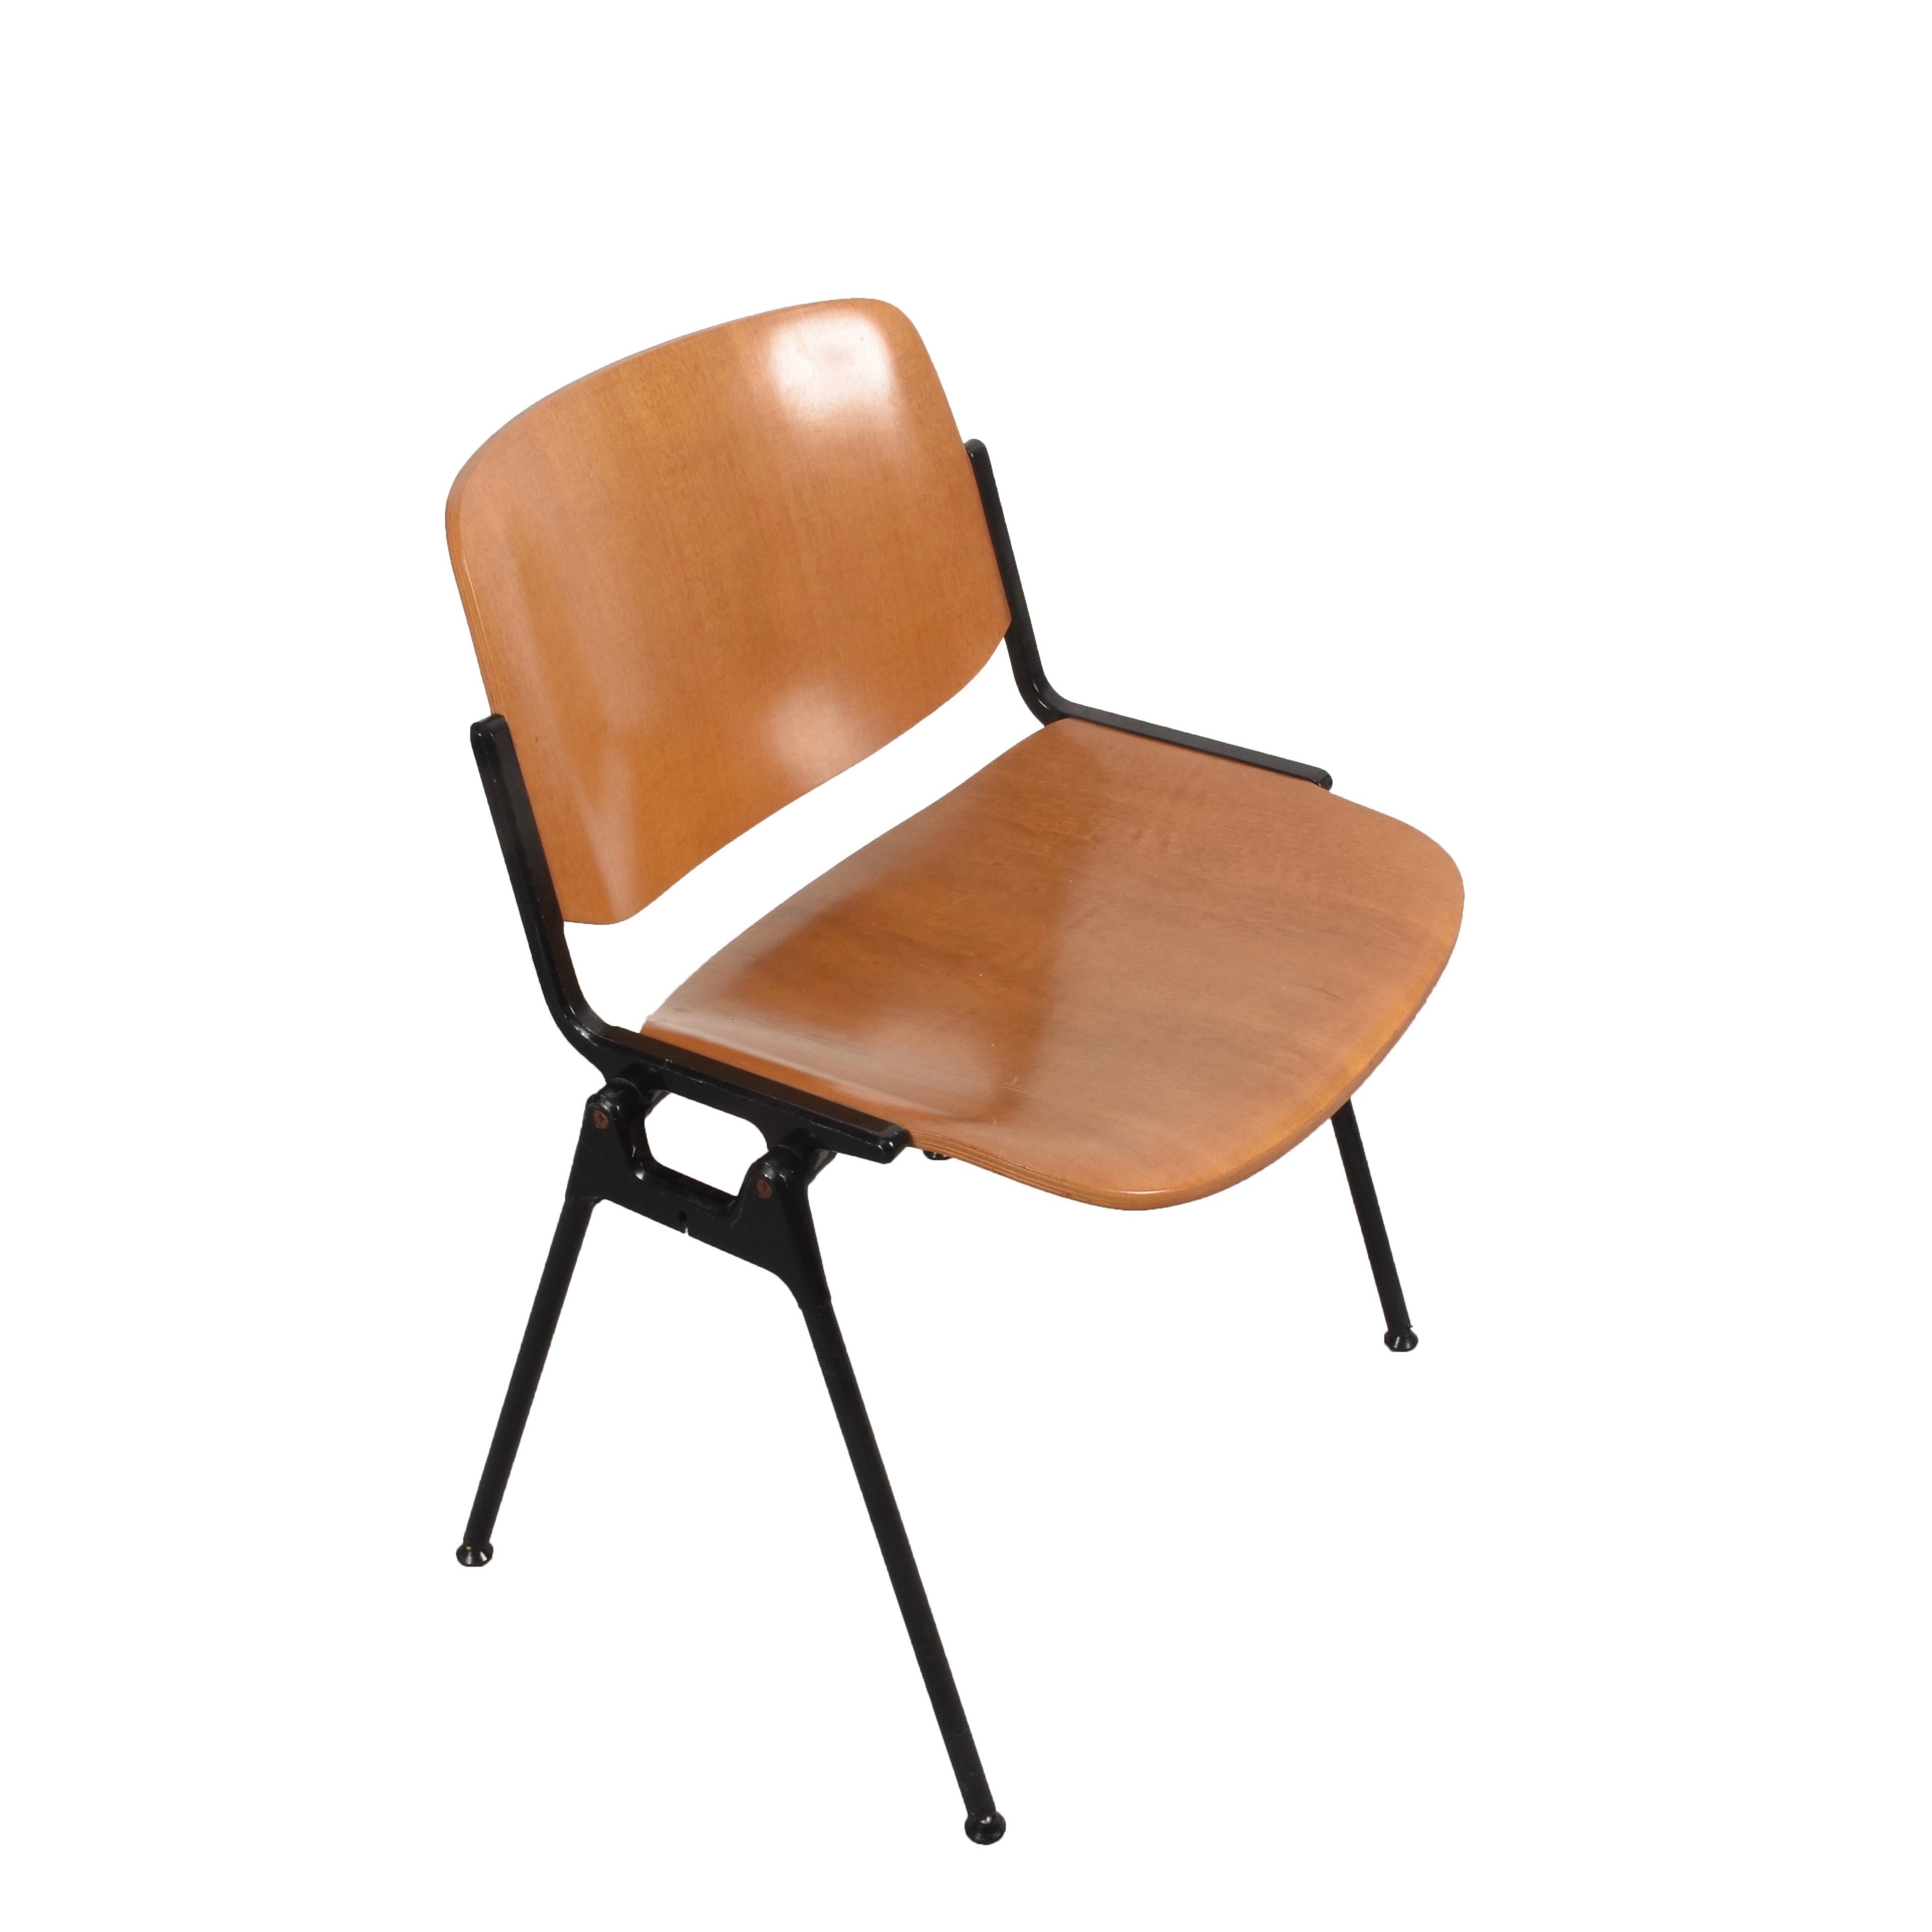 Chair designed by Giancarlo Piretti for Castelli. Wooden seat and back. 
Black enamelled aluminum
Eternal and indestructible chair.